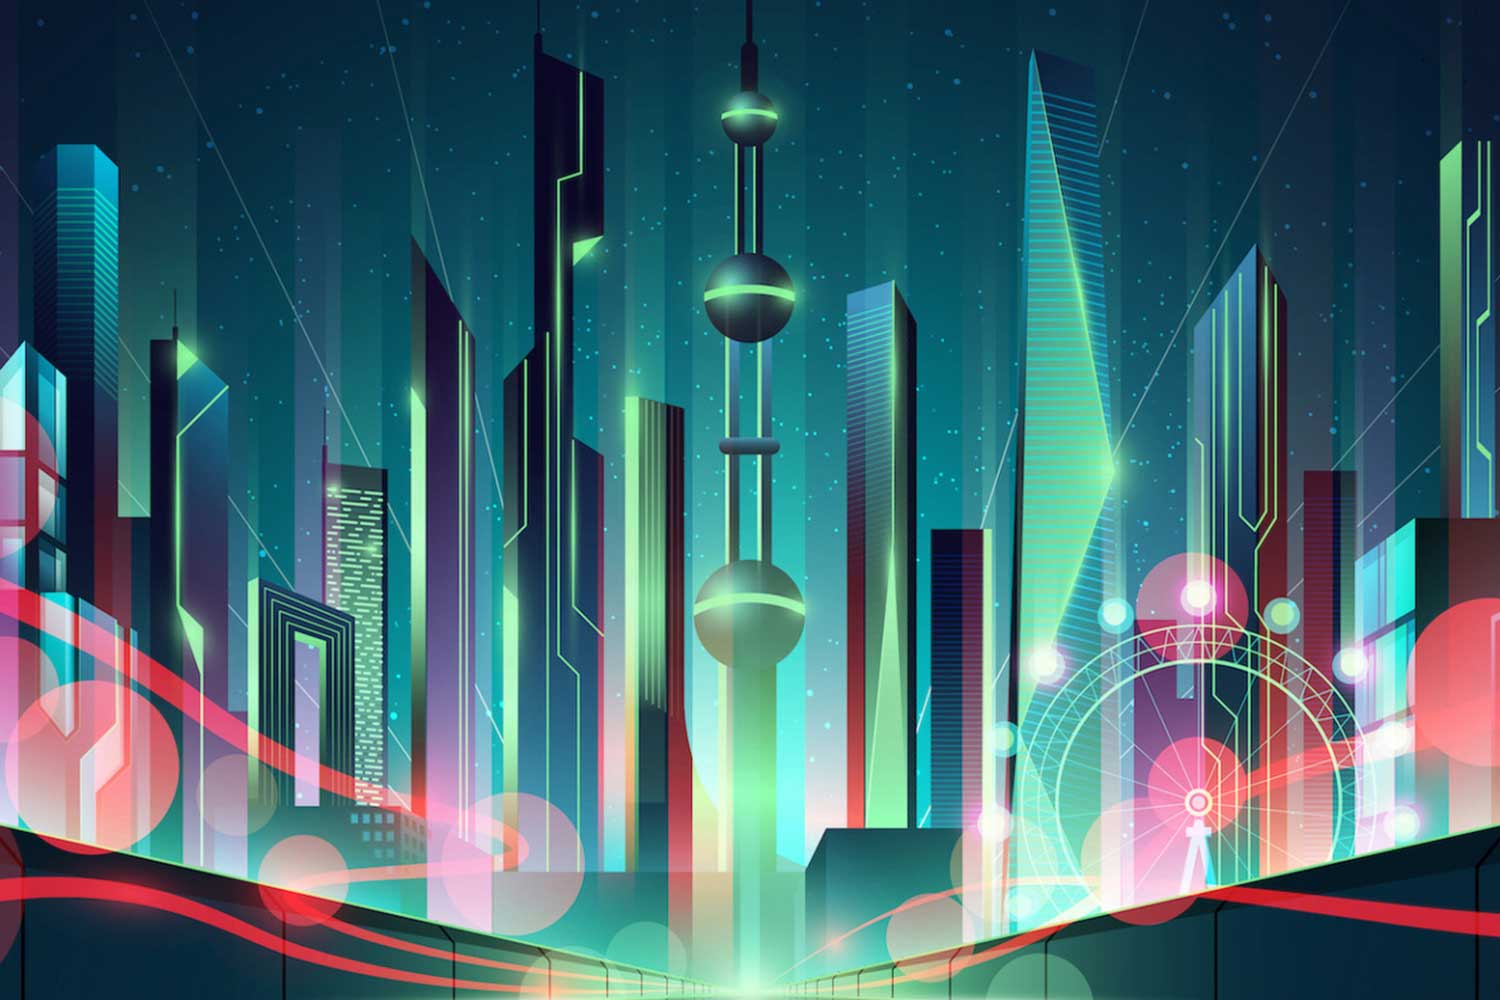 An illustration of a futuristic city at nighttime enveloped in color and light.